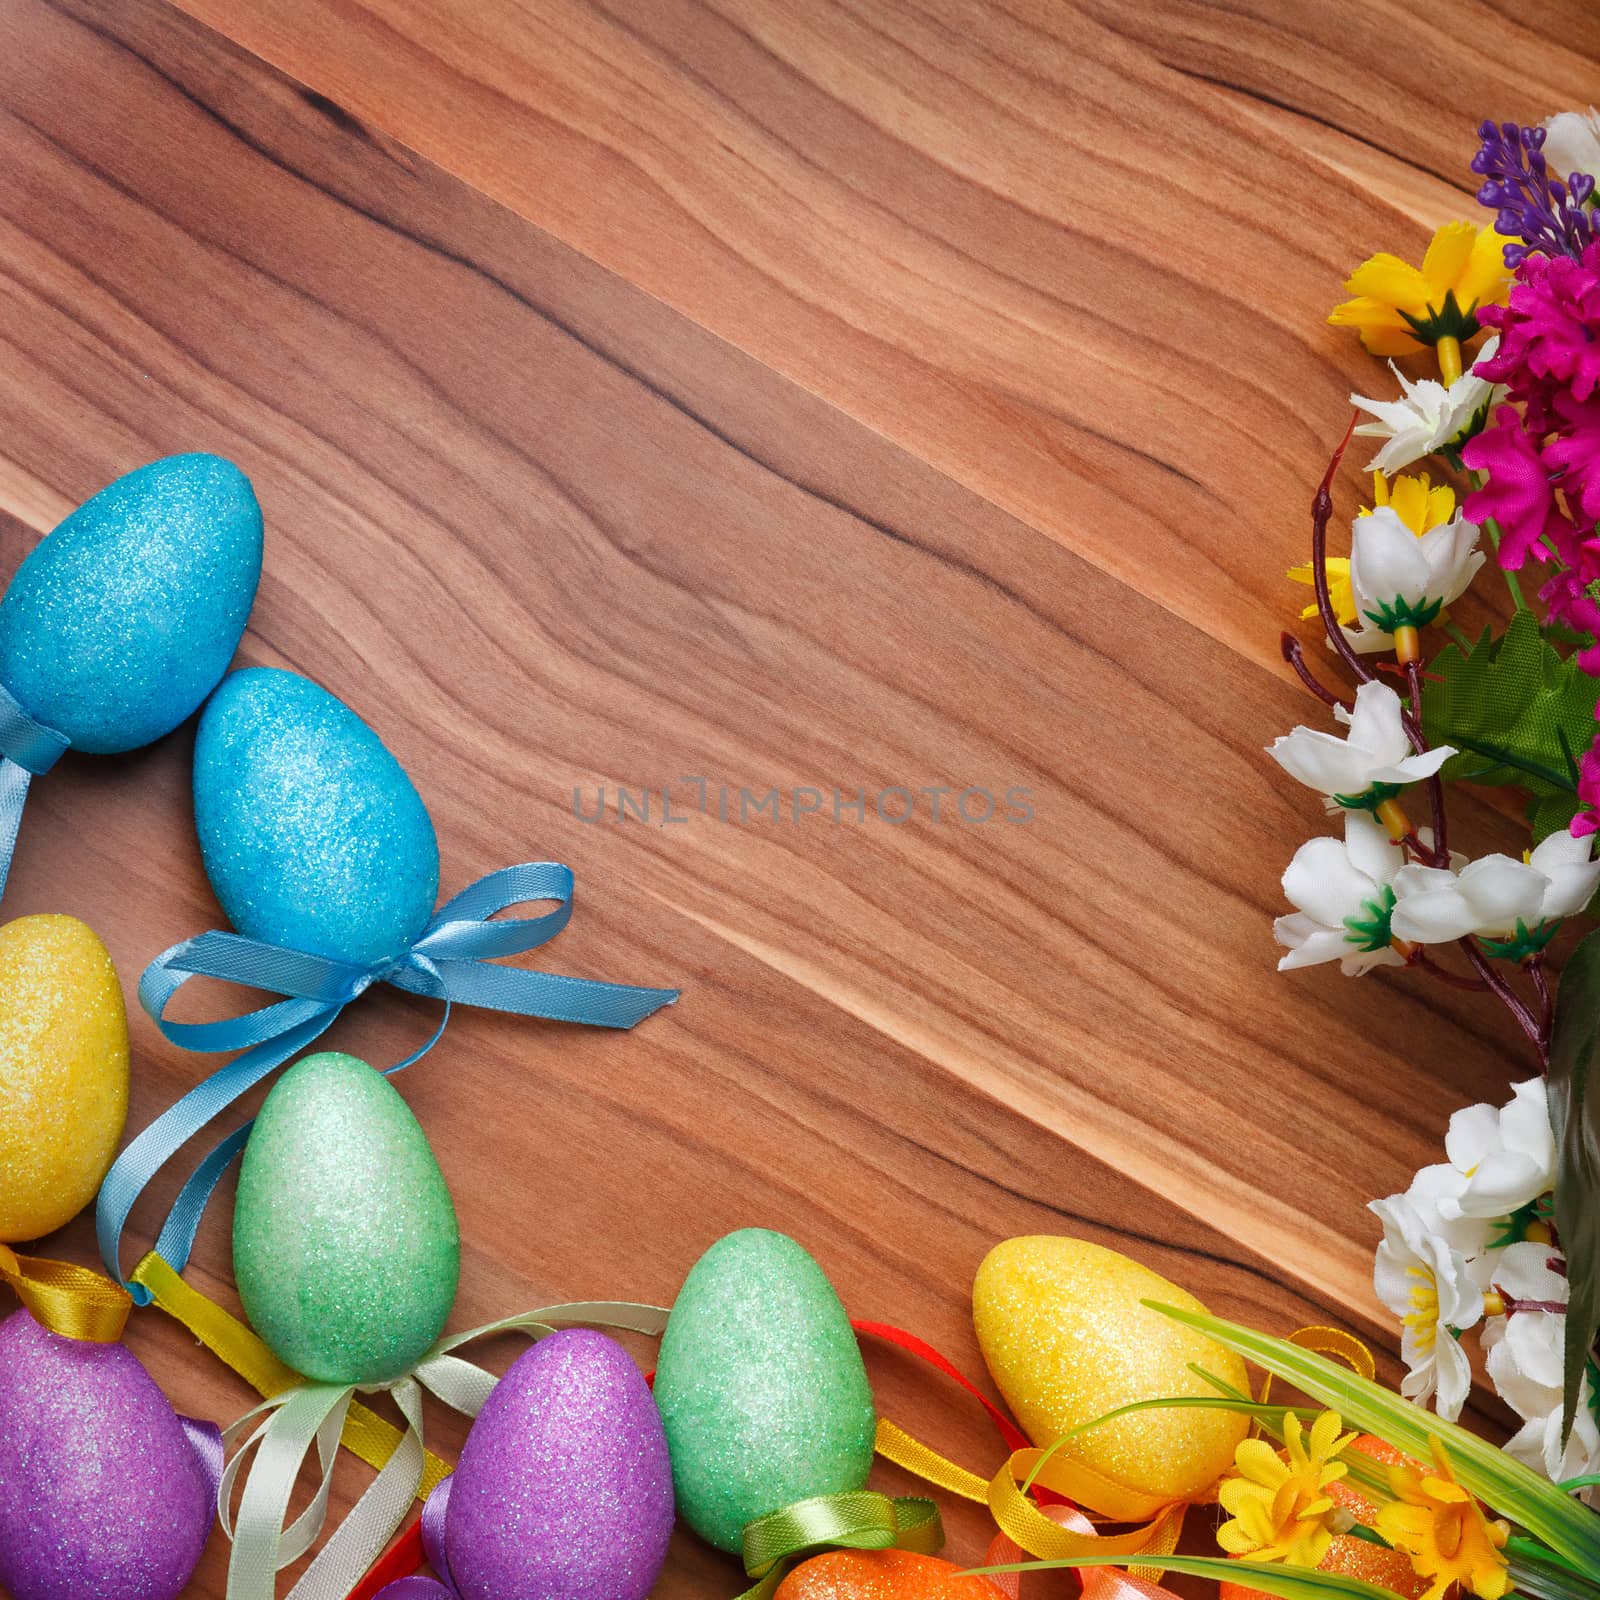 Easter flower arrangement and colorful eggs on wooden surface by serkucher